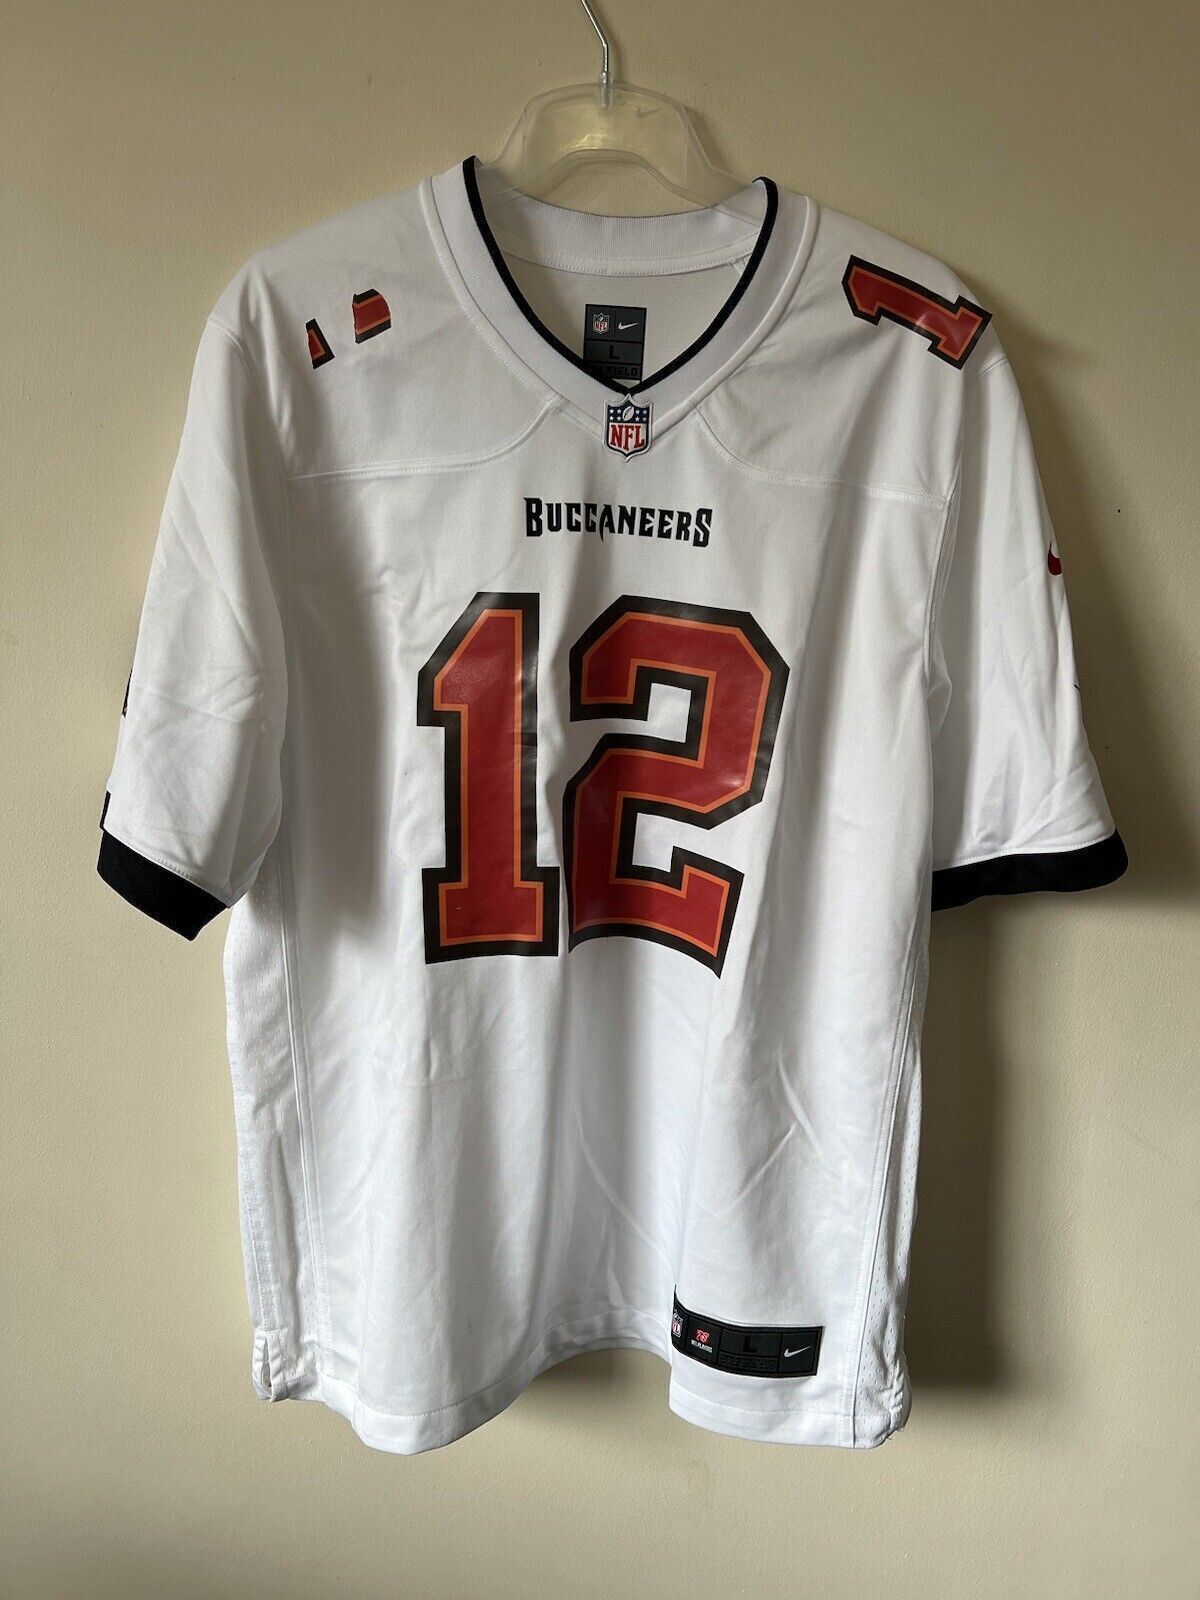 Nike NFL Tampa Bay Buccaneers Road Game Jersey BRADY Mens Size Large